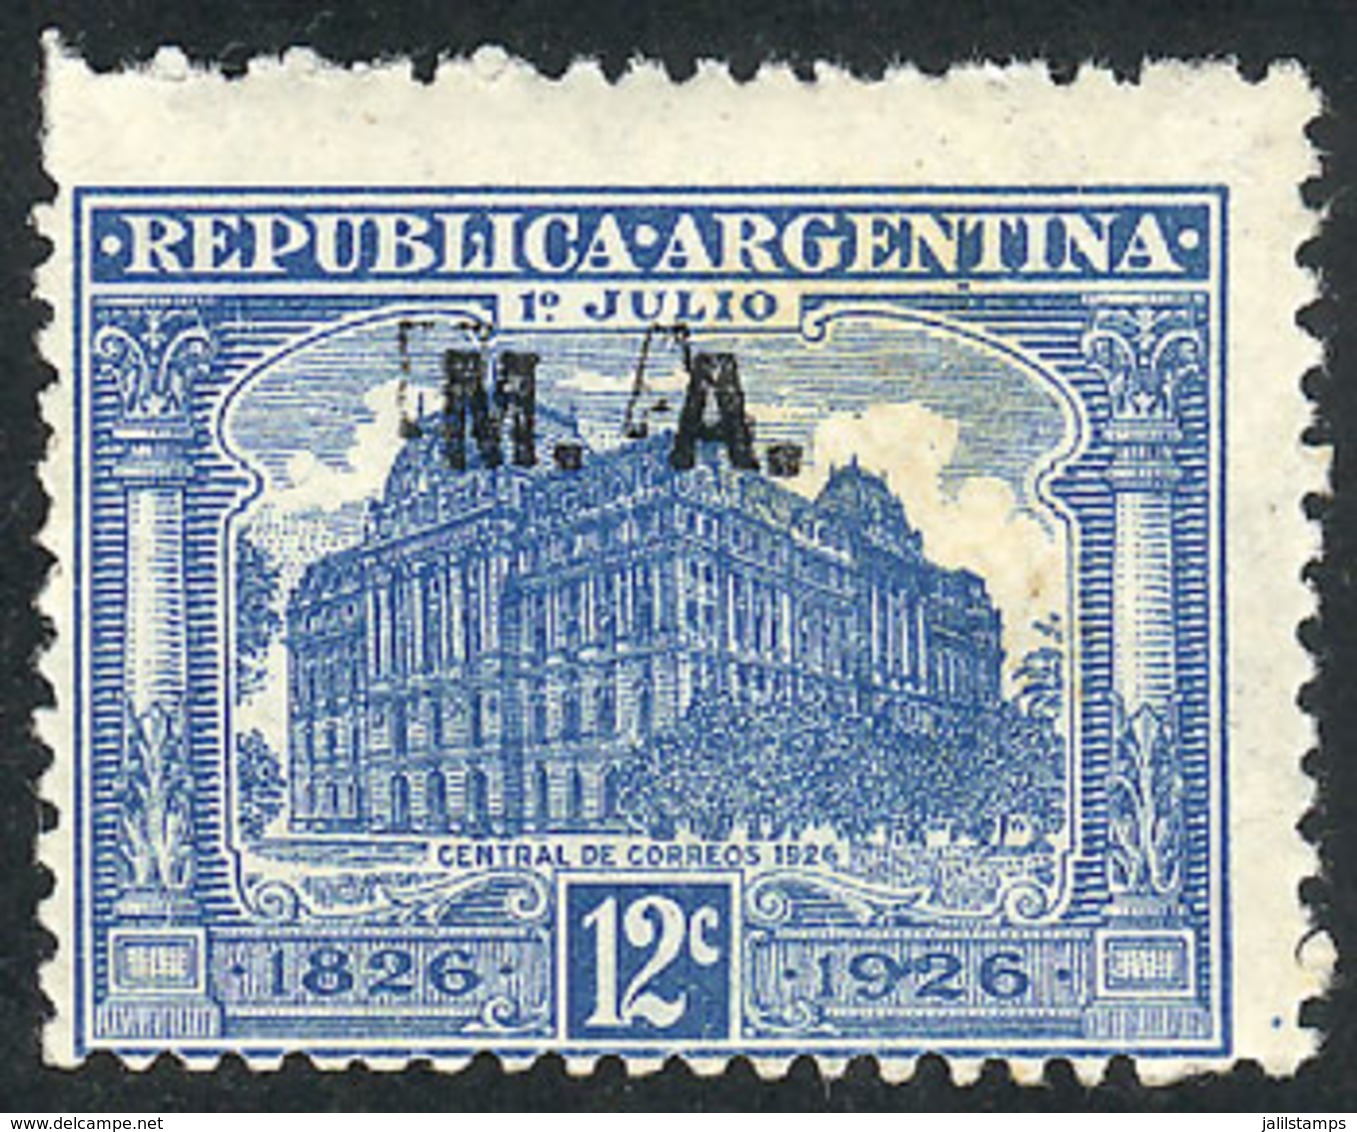 245 ARGENTINA: GJ.97a, With DOUBLE OVERPRINT Variety, Signed By Victor Kneitschel On Back, VF Quality, Rare! - Officials